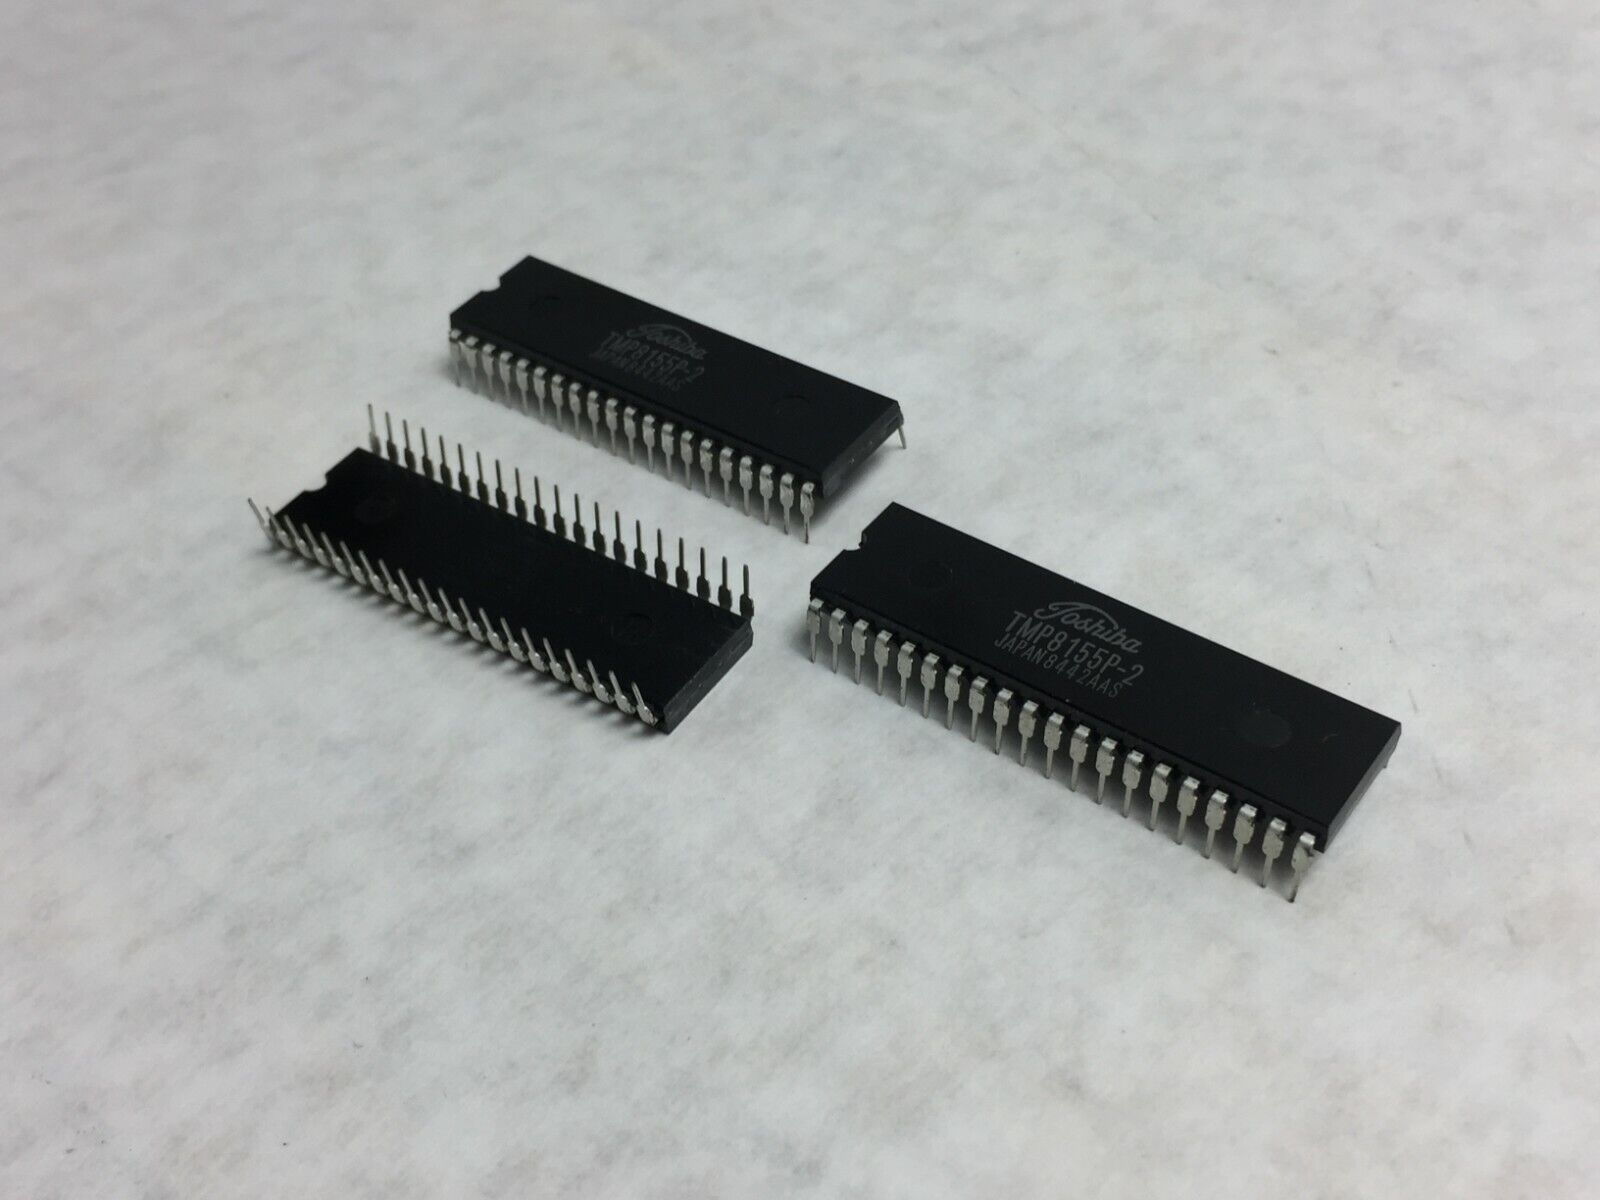 (3) Genuine Toshiba TMP8155P-2  Integrated Circuit   Lot of 3